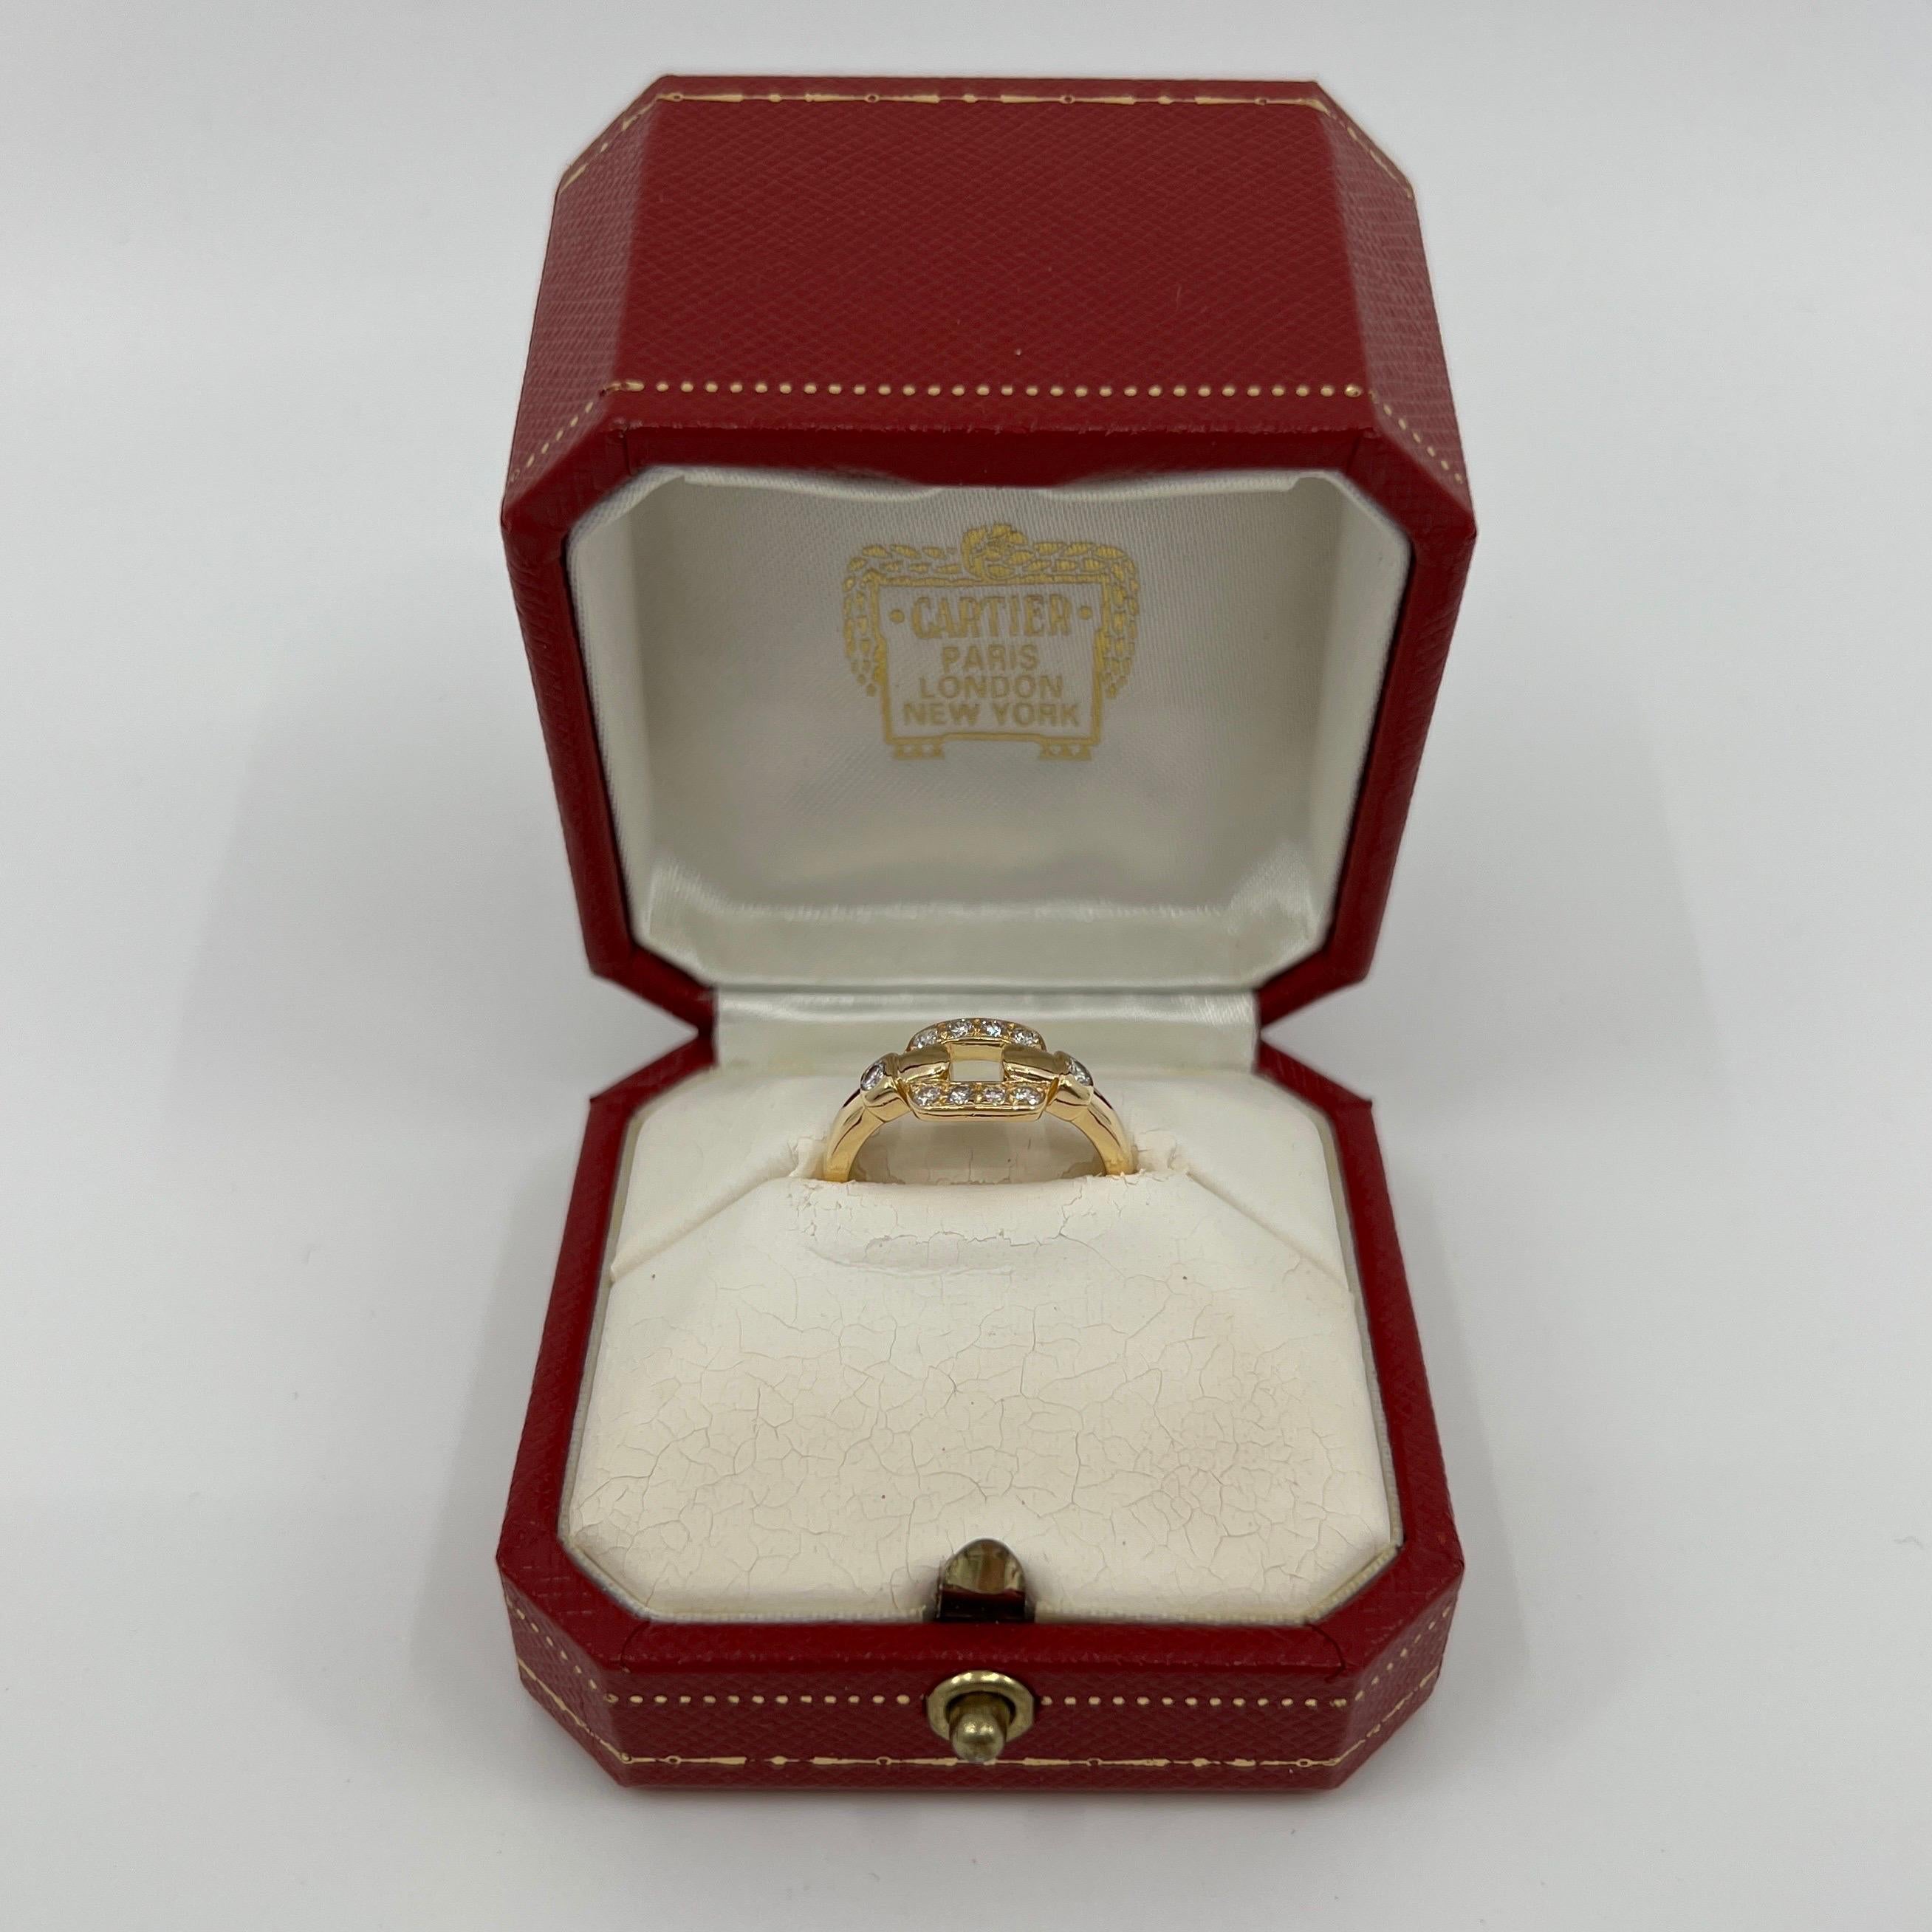 Rare Vintage Cartier Nymphea Diamond 18k Yellow Gold Cluster Ring.

Stunning yellow gold ring set with 10 stunning round colourless diamonds. E colour VVS clarity, all with an excellent round brilliant cut.
Fine jewellery houses like Cartier only